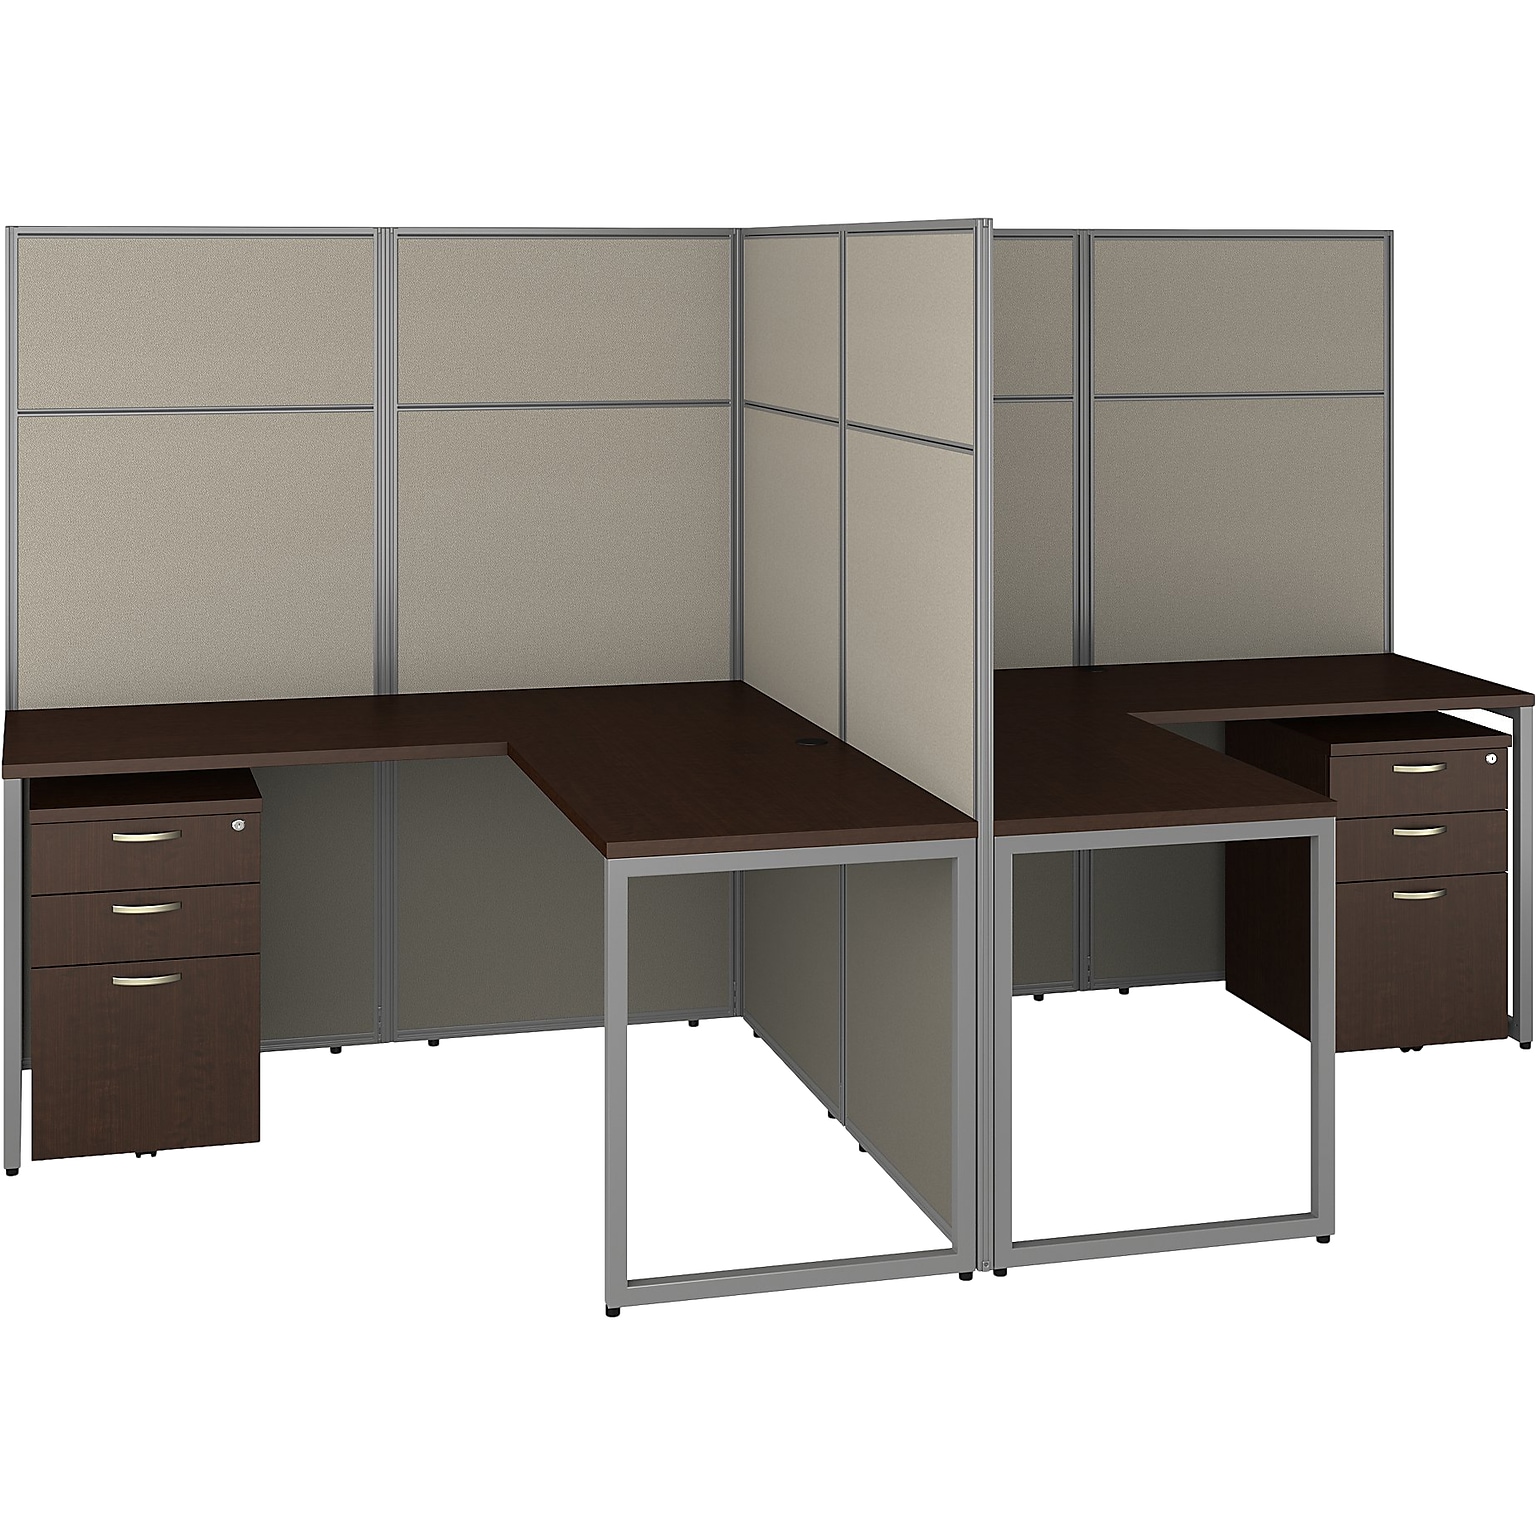 Bush Business Furniture Easy Office 66.34H x 119W 2 Person T-Shaped Cubicle Panel Workstation, Mocha Cherry (EODH56SMR-03K)